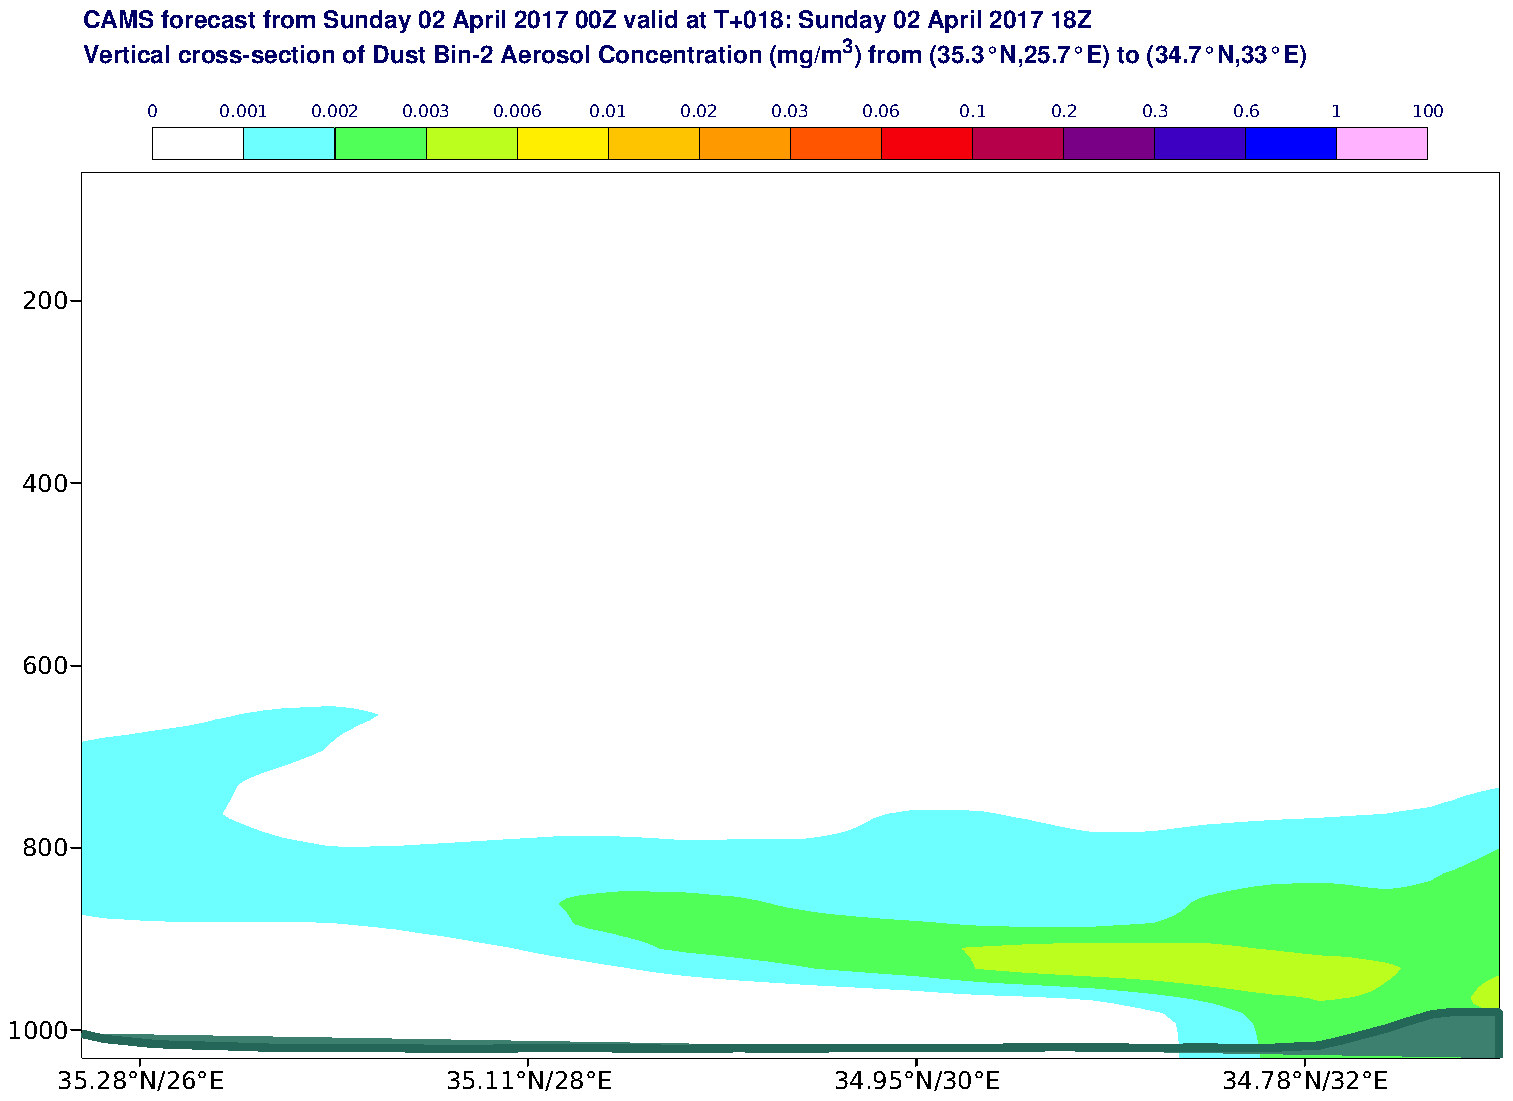 Vertical cross-section of Dust Bin-2 Aerosol Concentration (mg/m3) valid at T18 - 2017-04-02 18:00